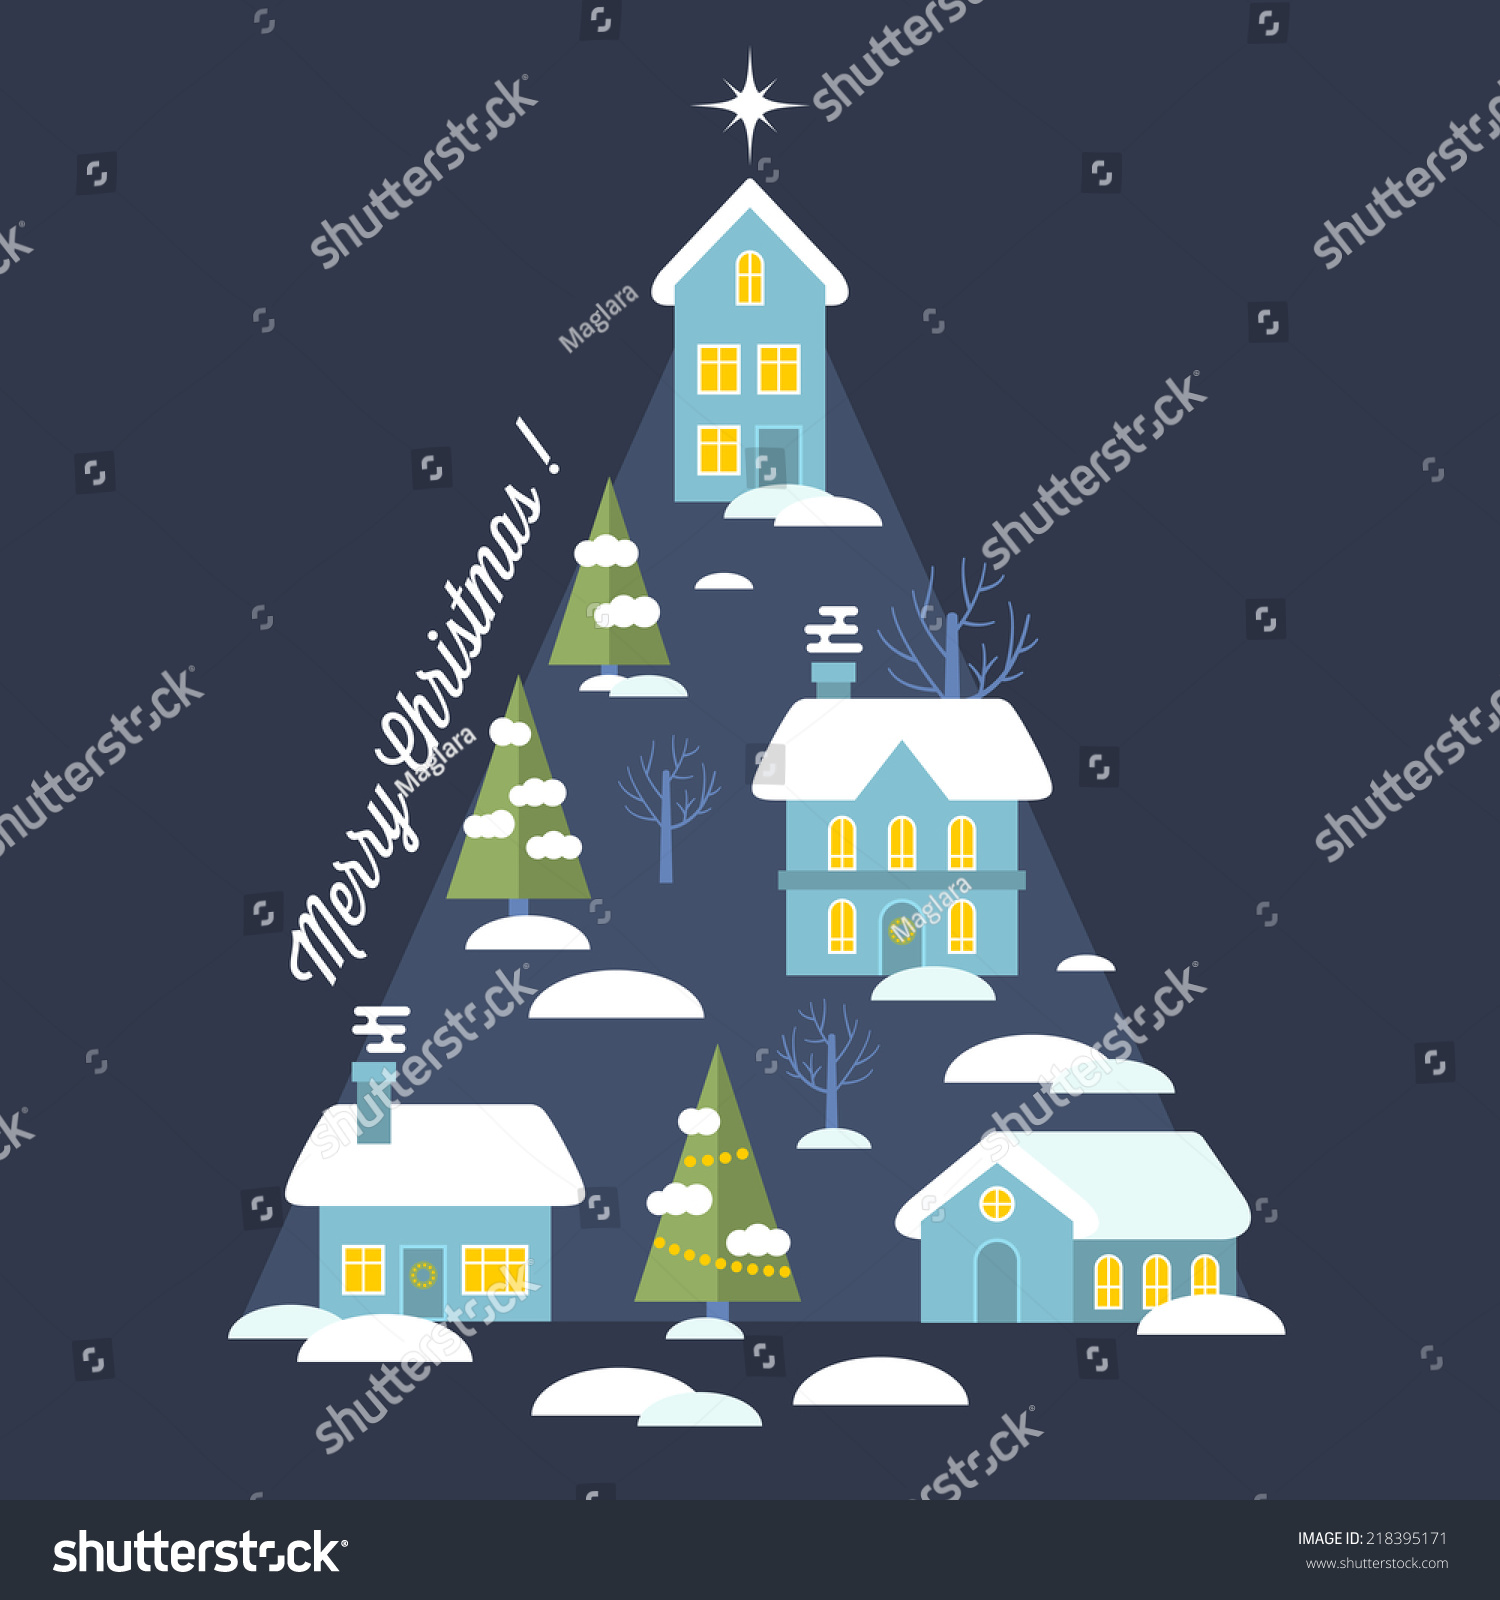 merry christmas and happy new year card church and green tree under snow christianity and Catholic winter city cathedral vector illustration